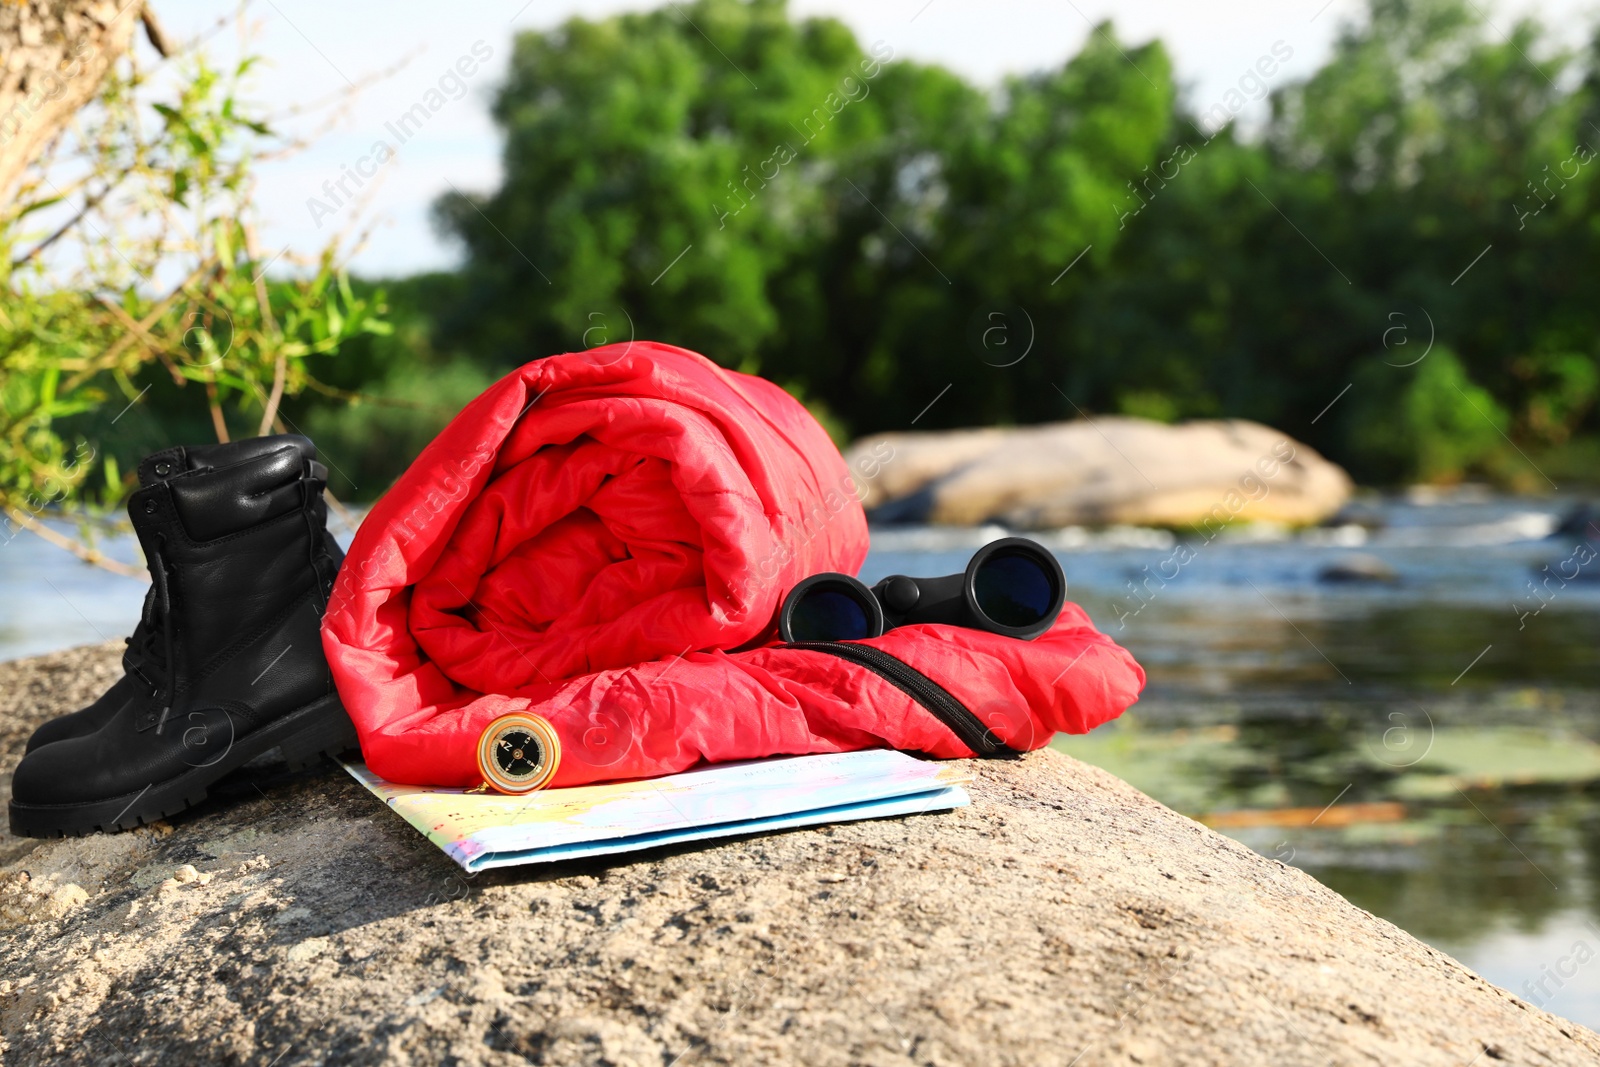 Photo of Rolled sleeping bag and other camping gear outdoors on sunny day